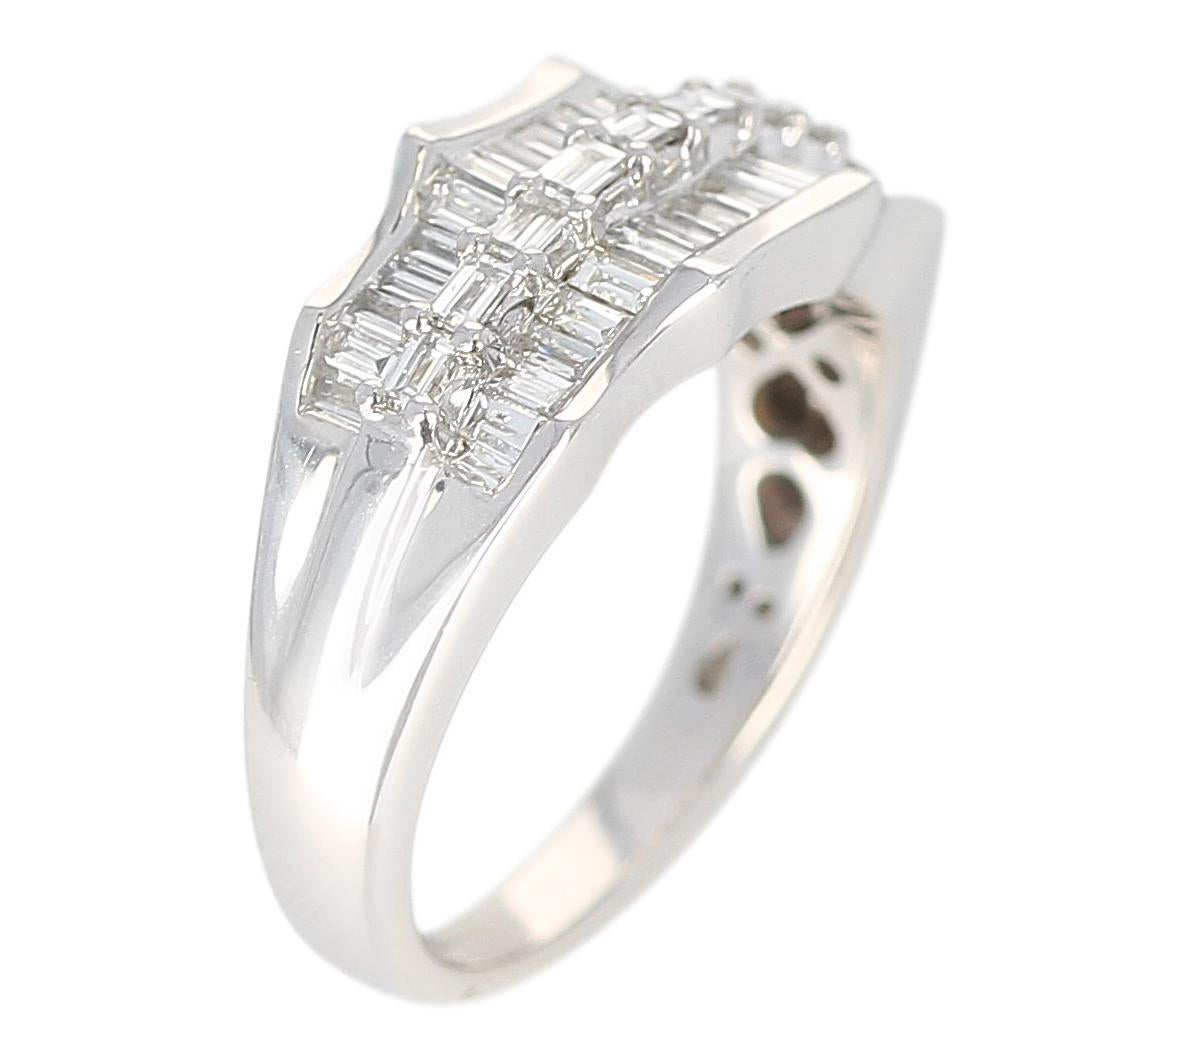 A Wavy Row Platinum Baguette Diamond Bridal Ring, with Diamonds weighing 1 carat. Total Weight: 7.51 grams, Ring Size US 6.50. 